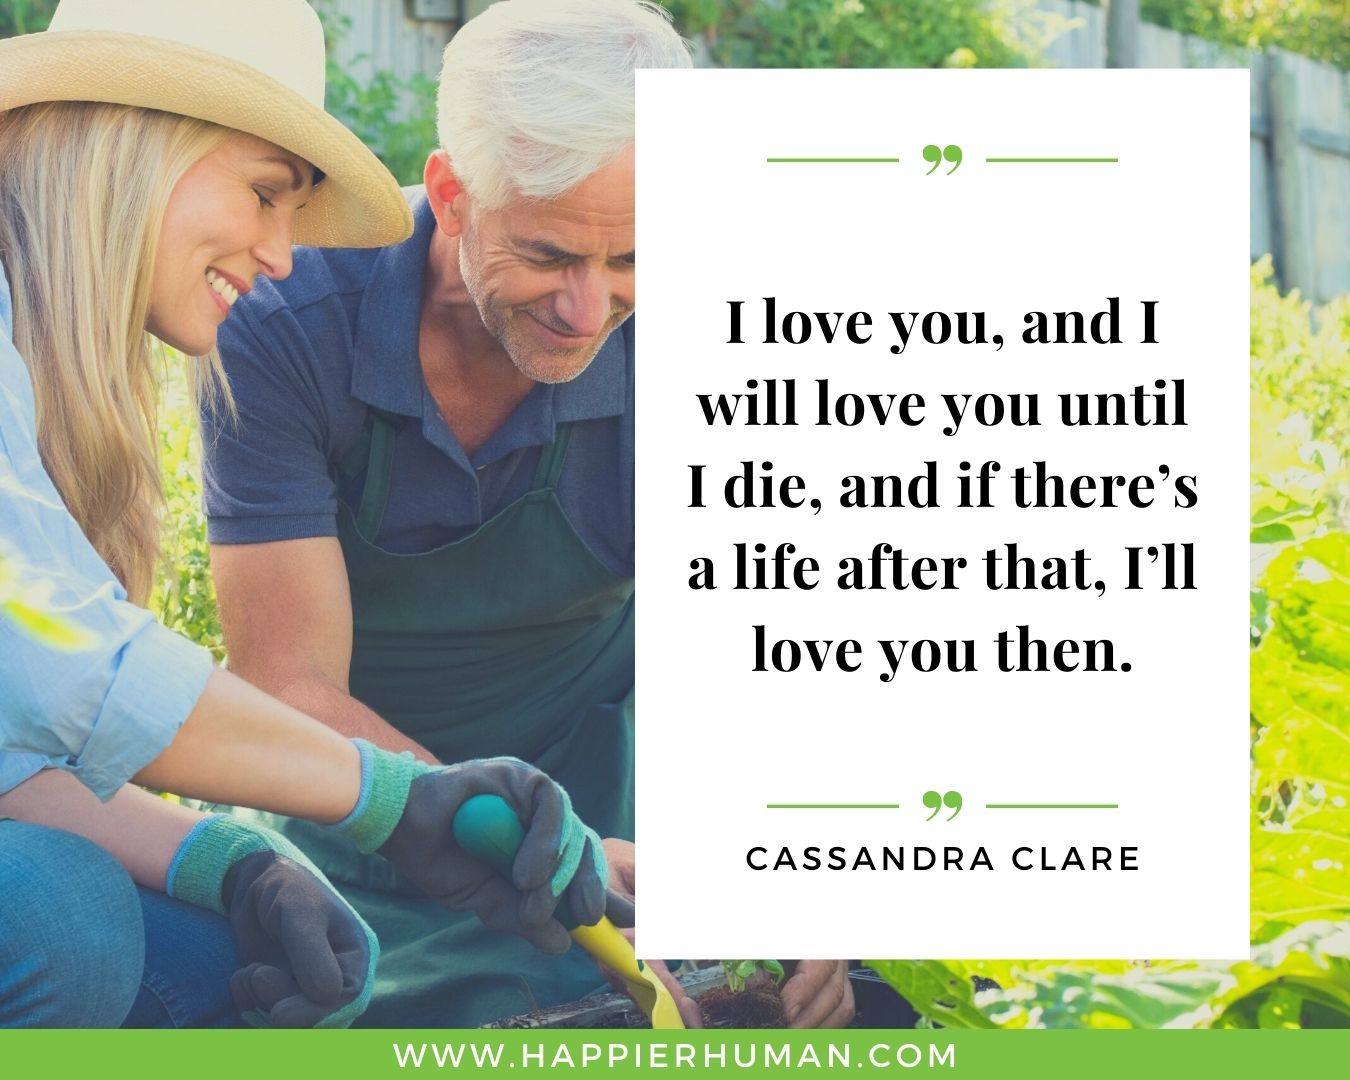 Unconditional Love Quotes for Her - “I love you, and I will love you until I die, and if there’s a life after that, I’ll love you then.” – Cassandra Clare